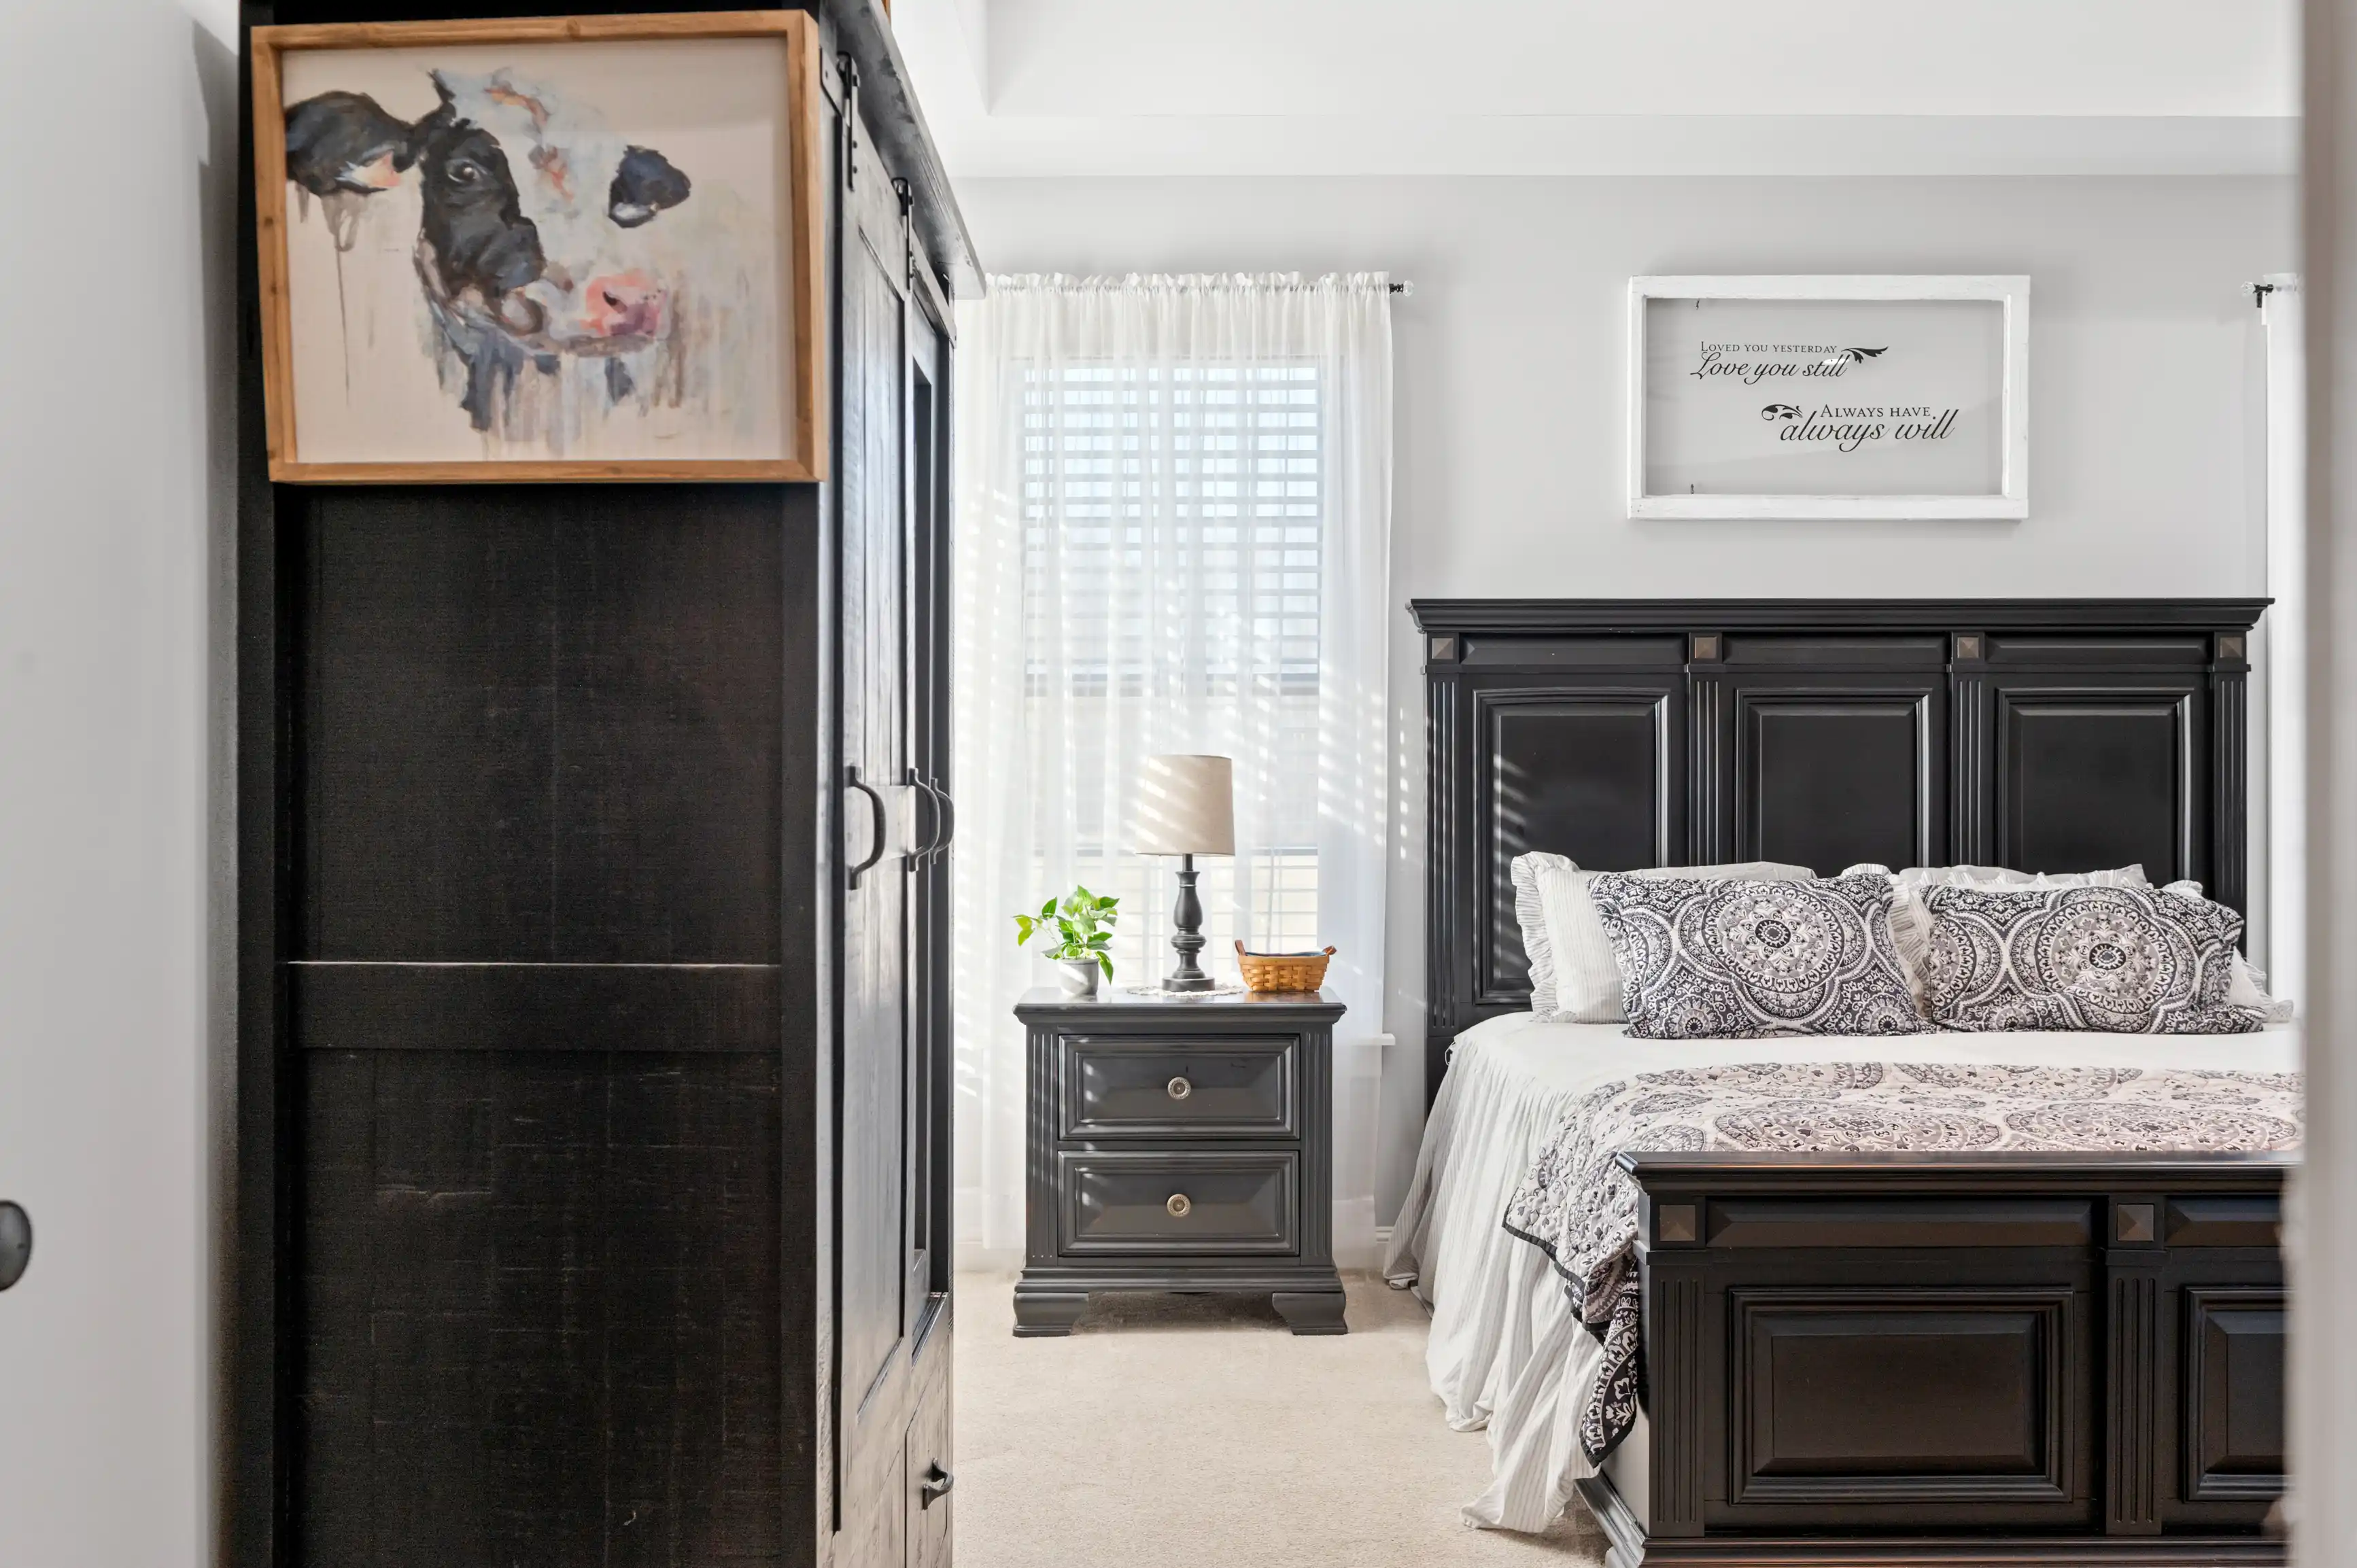 A cozy bedroom with white sheer curtains, elegant black furniture including a bed with patterned bedding, a nightstand with a lamp, and wall art above the headboard with an inspirational quote.